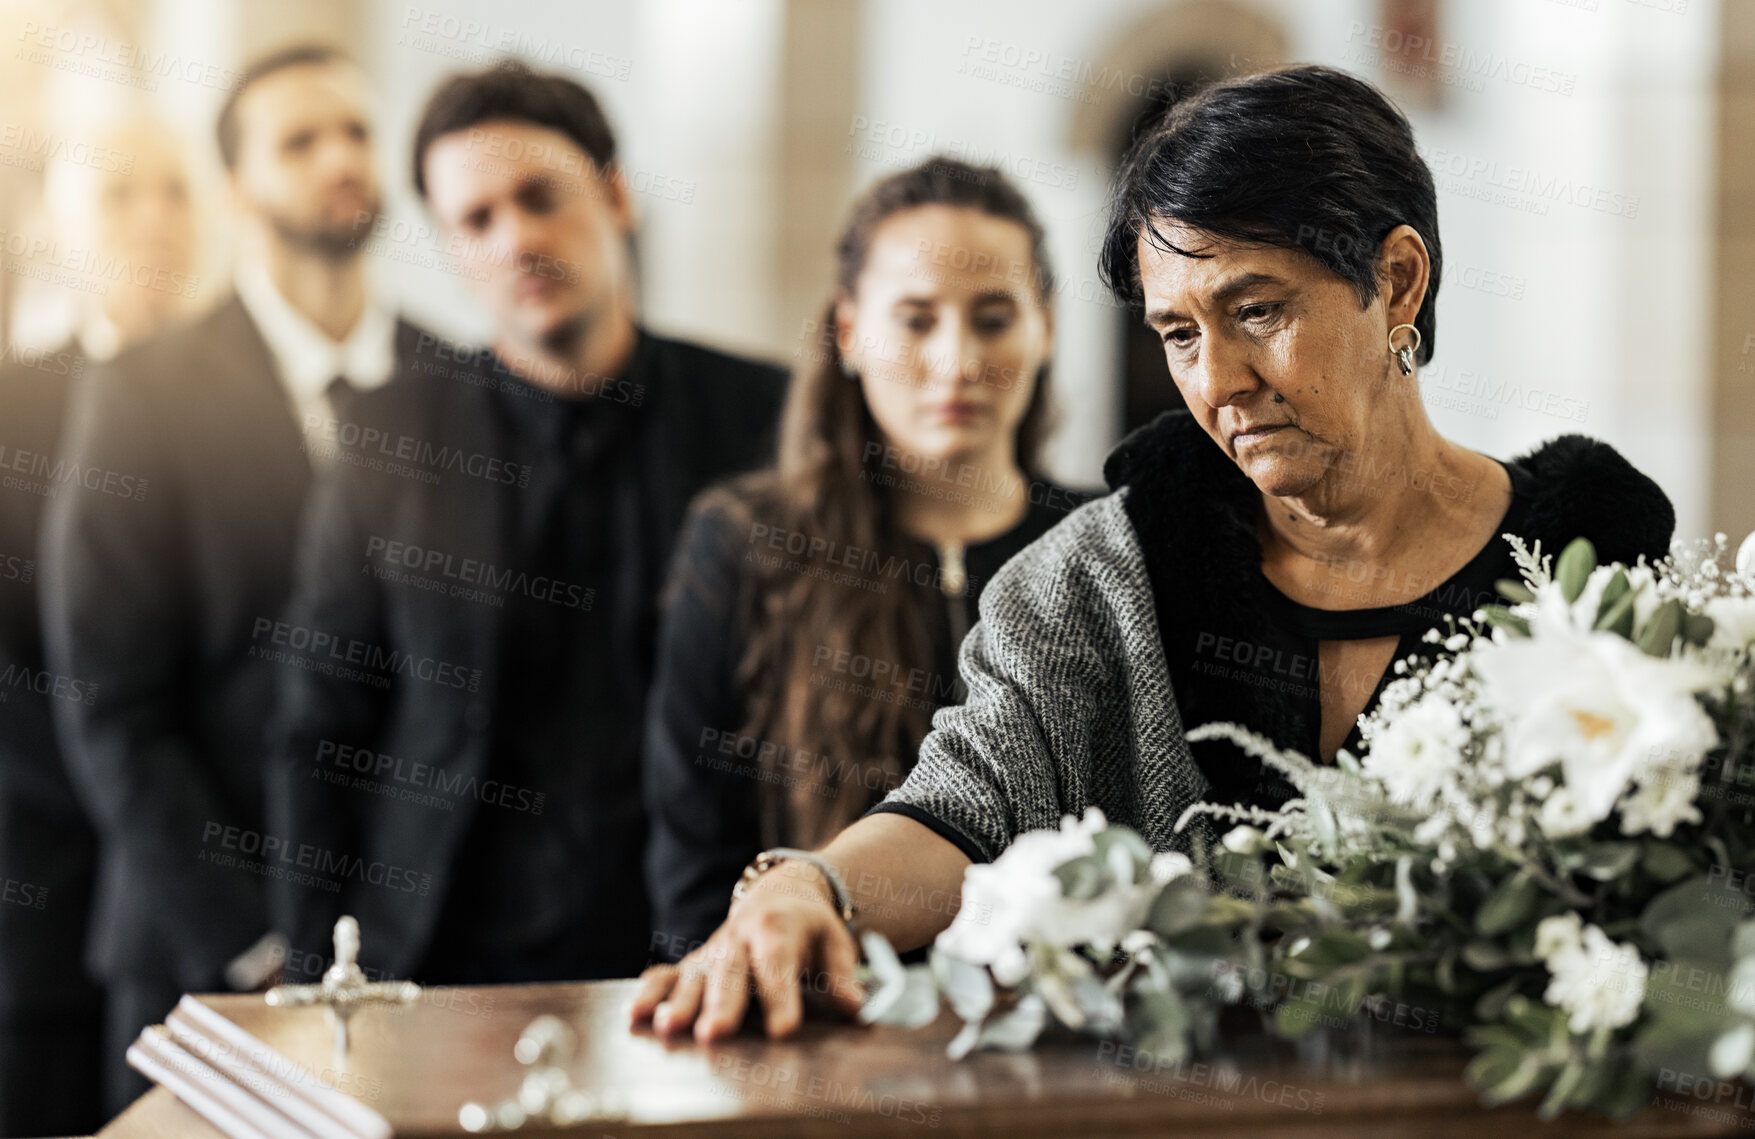 Buy stock photo Funeral, death and coffin in church or Christian family gathering together for support. Religion, sad people and mourning loss or religious catholic men and women grief in church service over casket